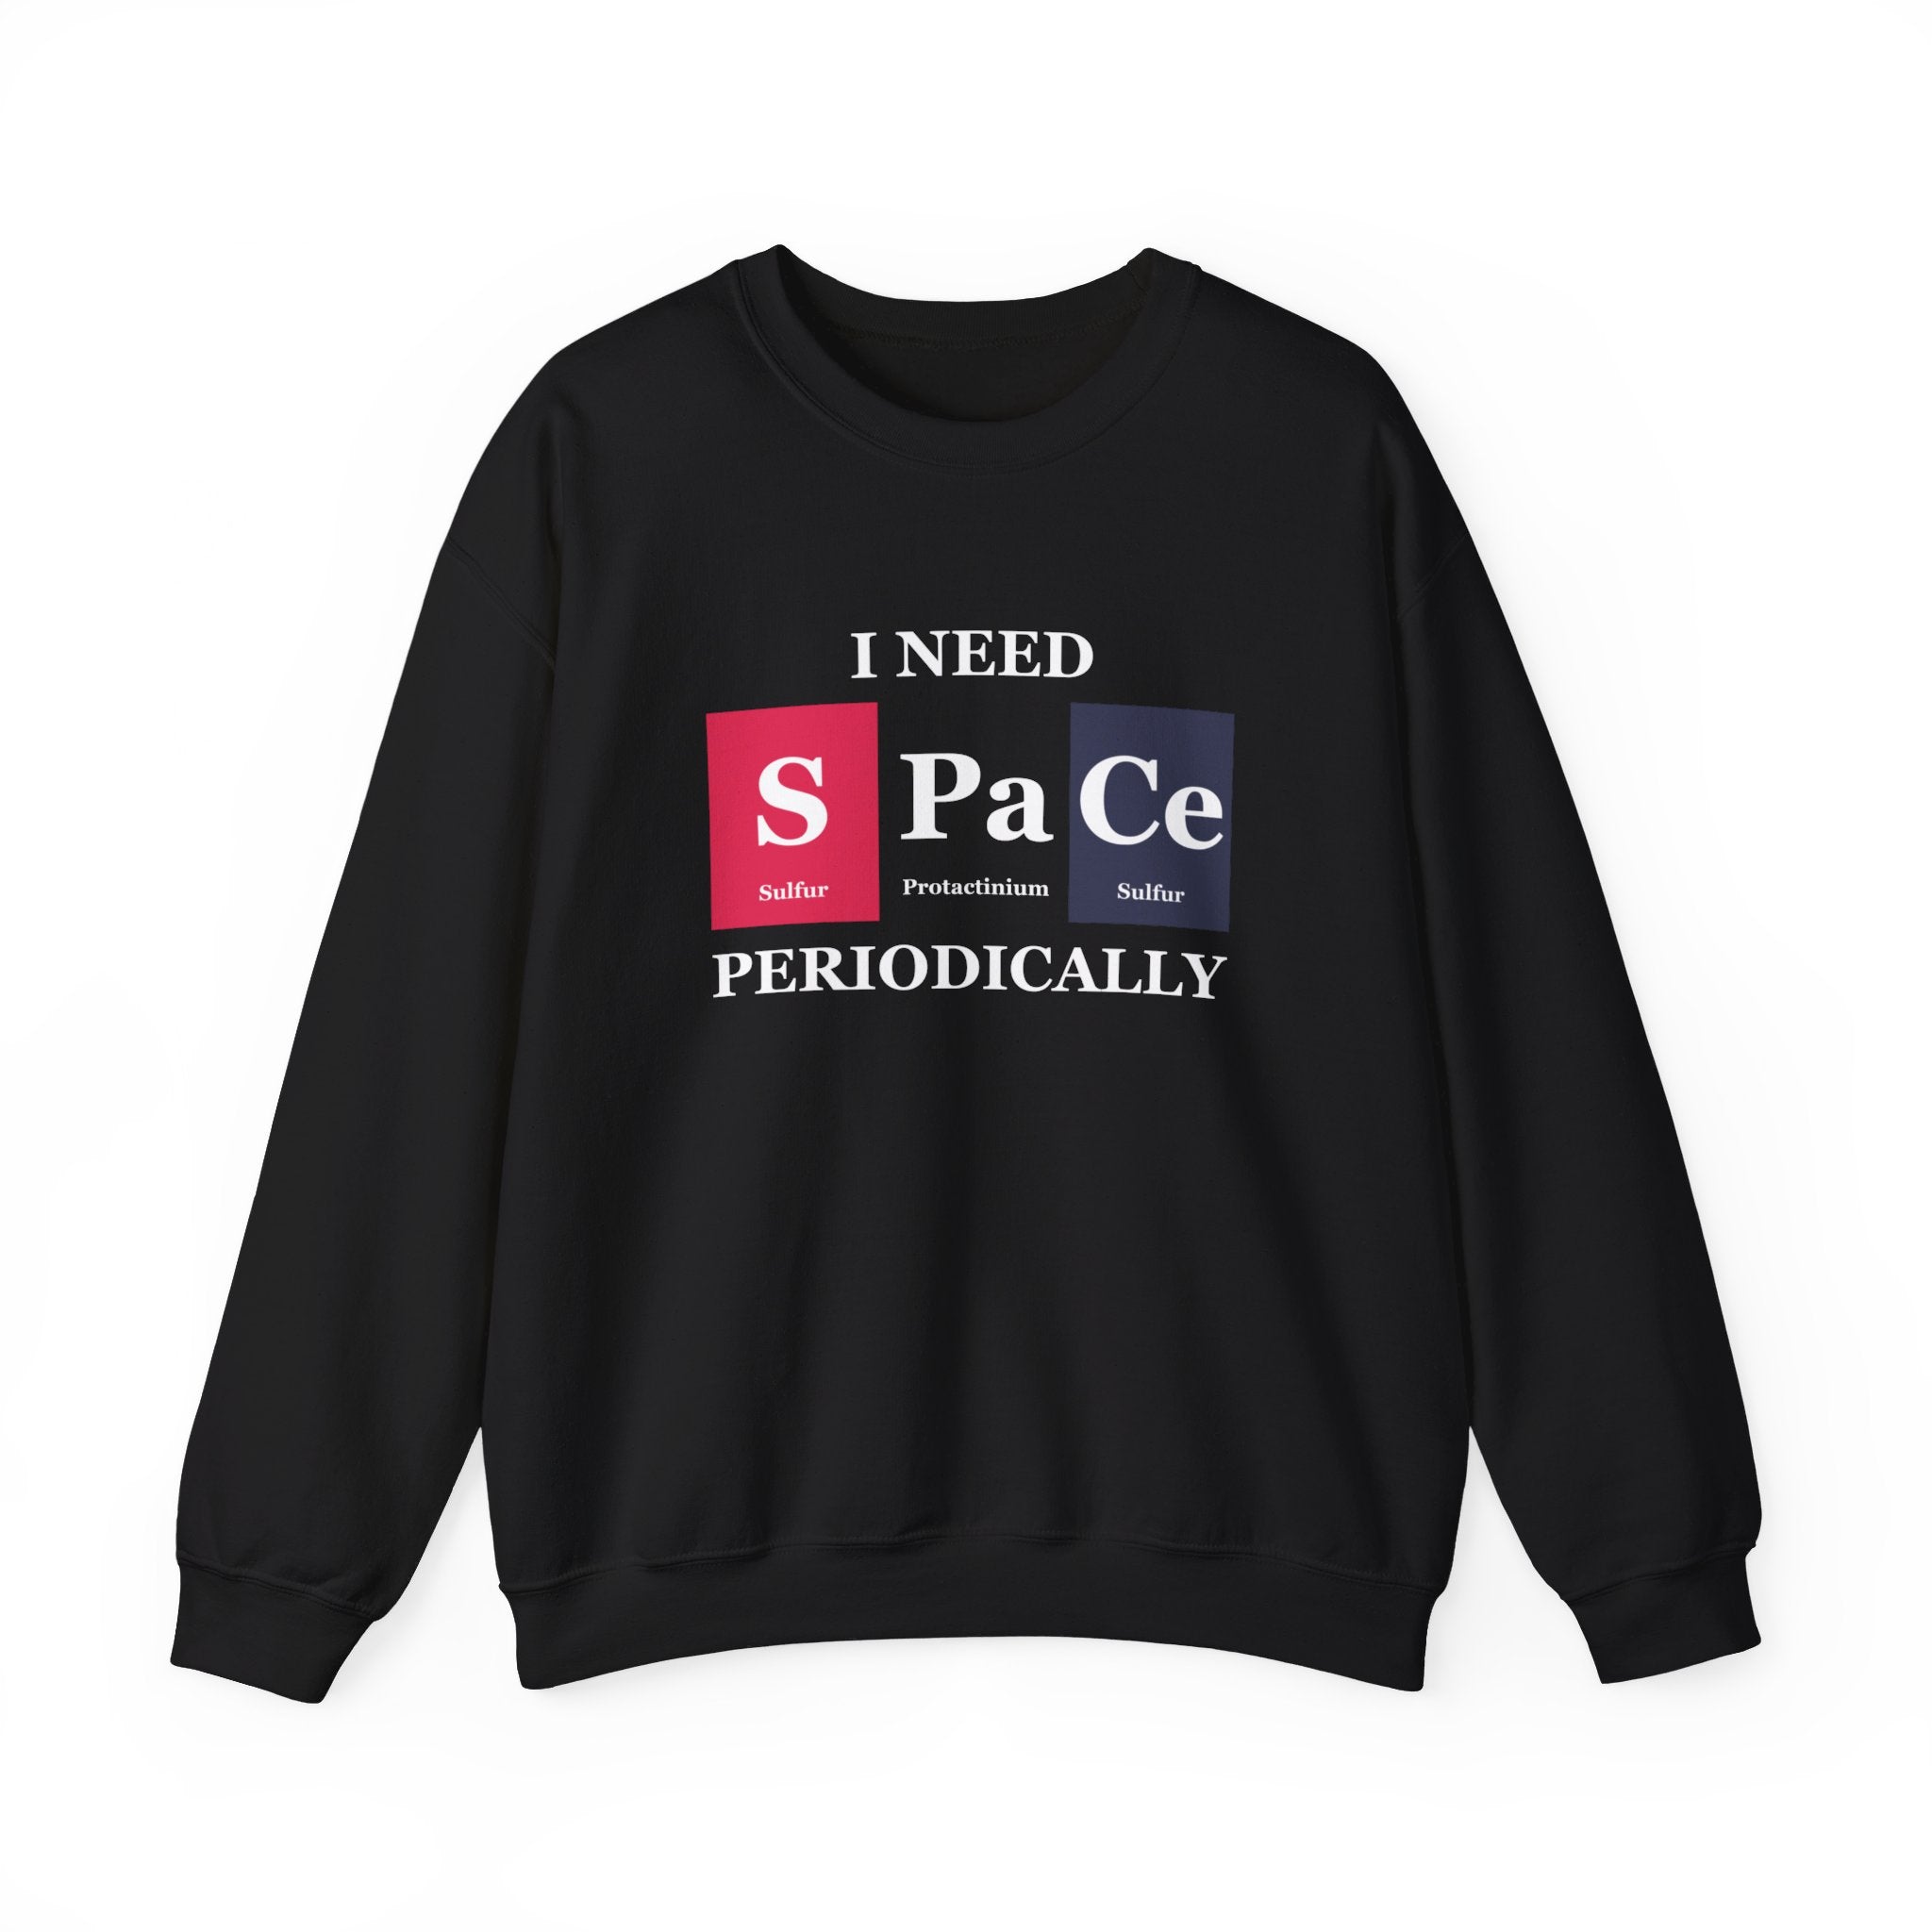 S-Pa-Ce - Sweatshirt featuring periodic table elements spelling out "I need S Pa Ce periodically," with Sulfur, Protactinium, and Cerium. Experience pure coziness while staying stylish.